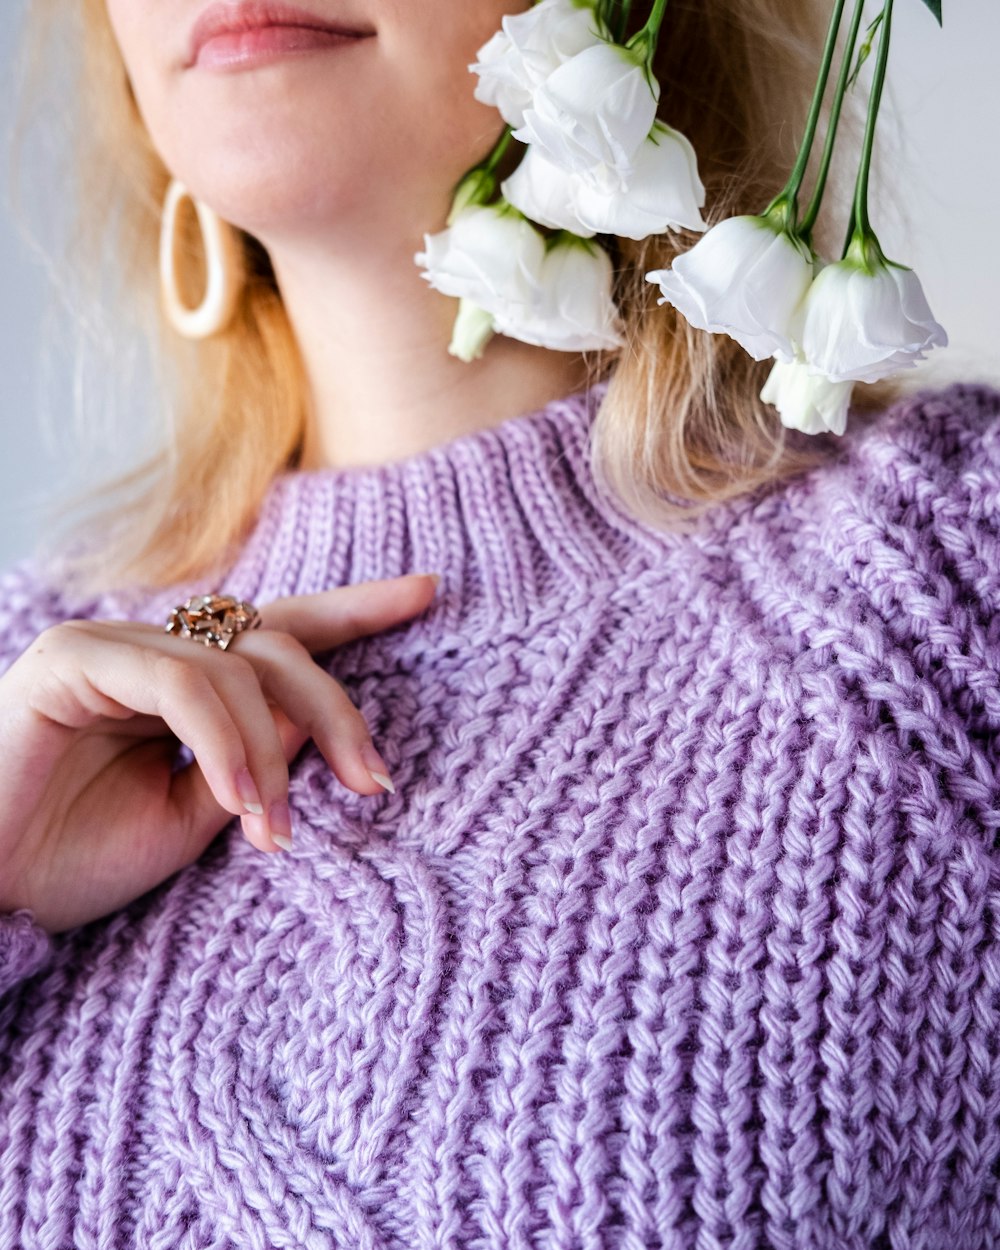 woman in white knit sweater holding white rose